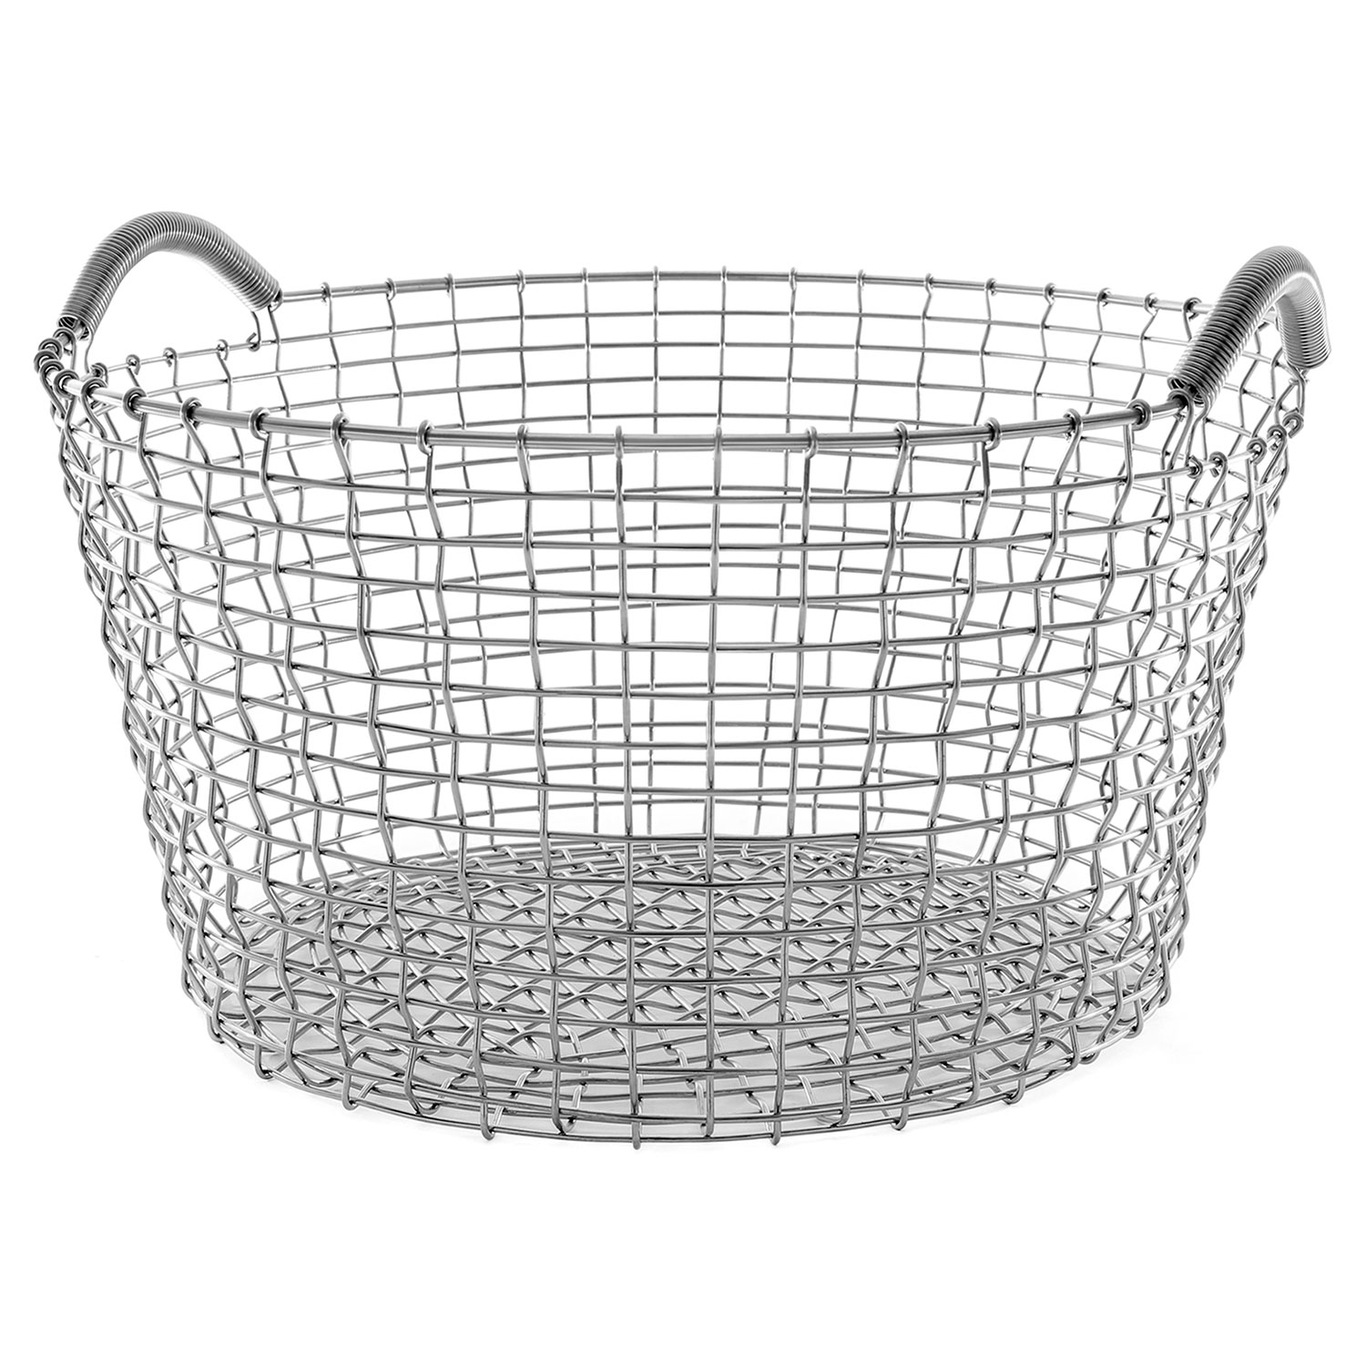 Classic 35 Basket, Acid-Proof Stainless Steel